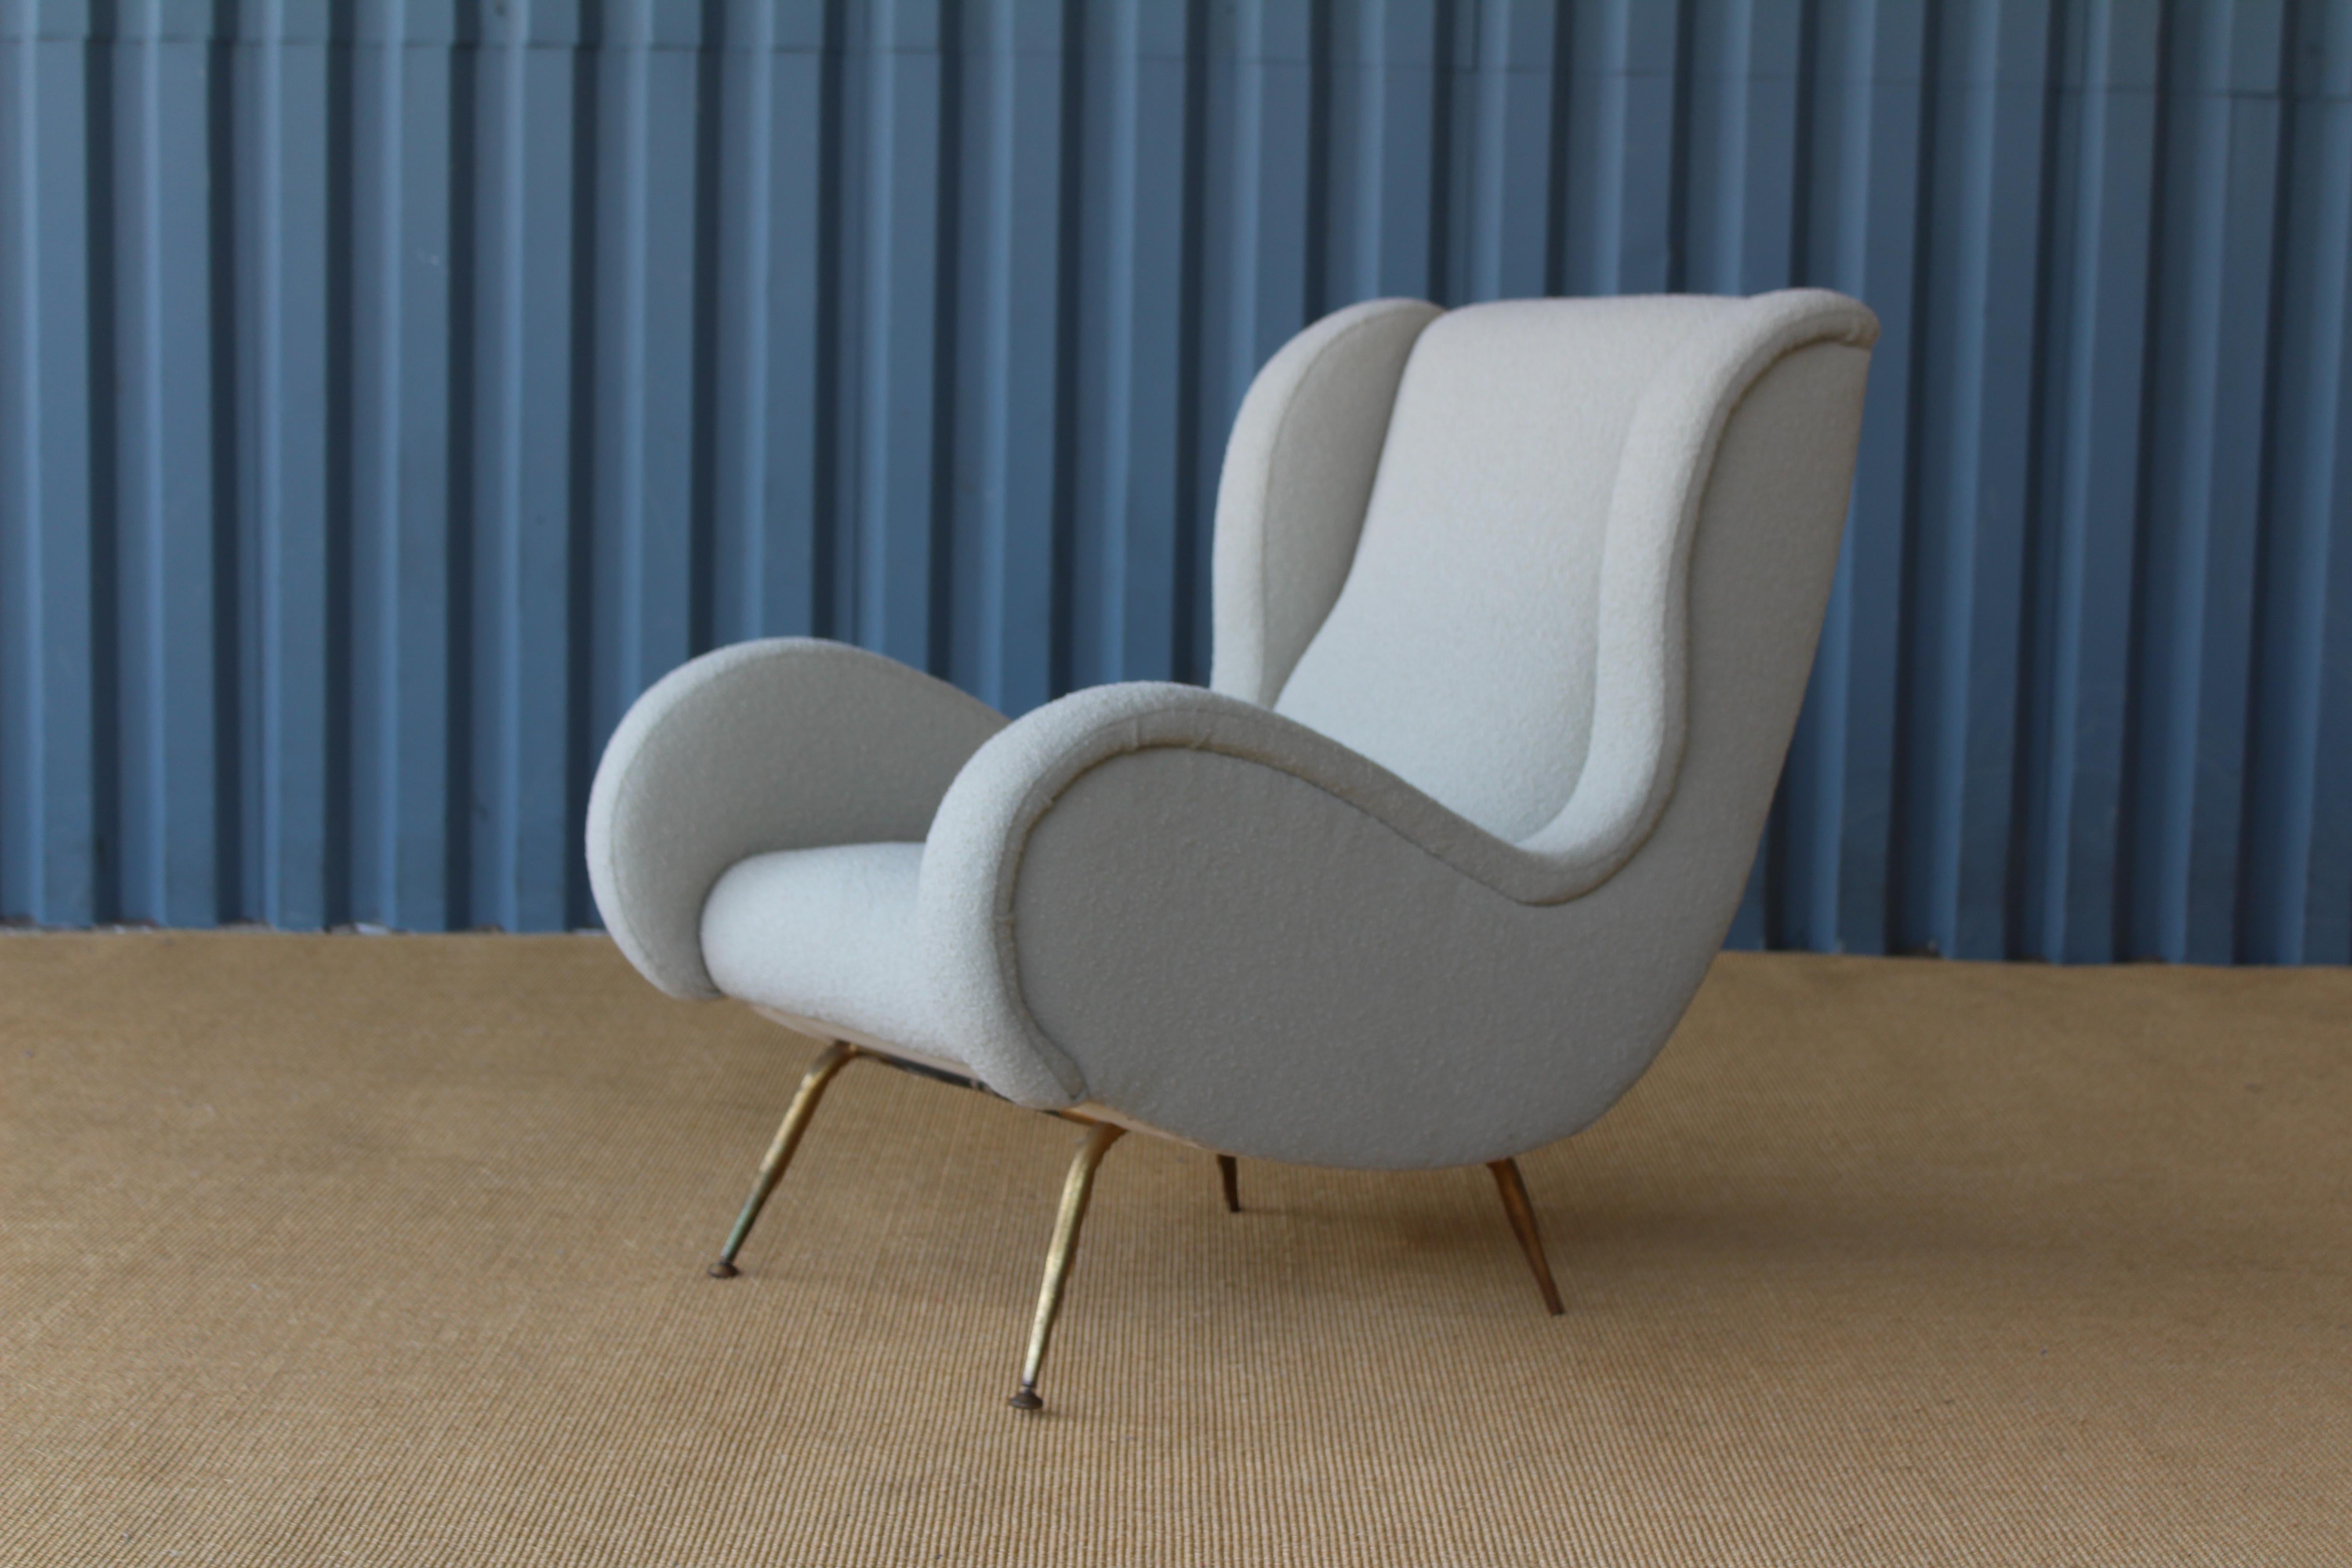 Midcentury 1950s Italian armchair with new beige bouclé upholstery by Knoll. Brass base and feet with pivoting glides shows original patina.